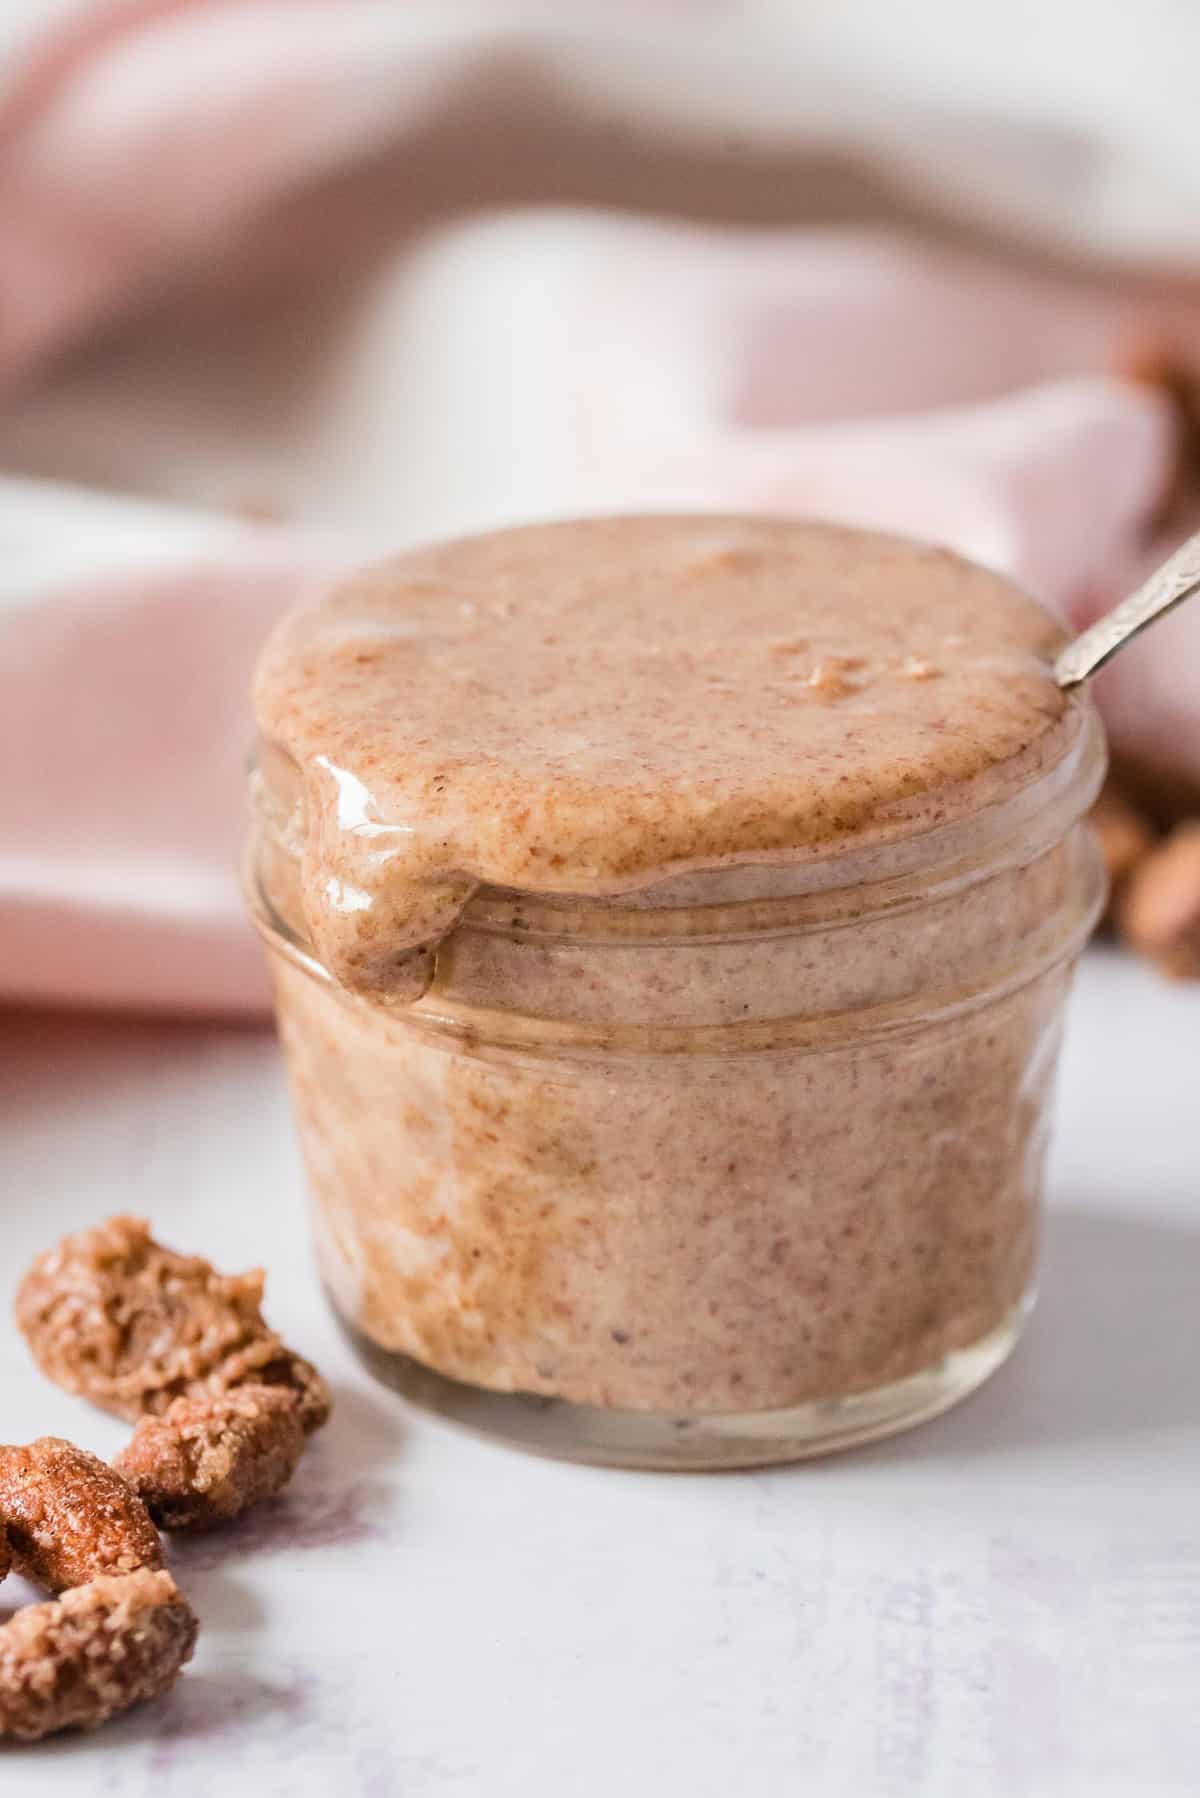 Almond butter overflowing from a small glass jar.